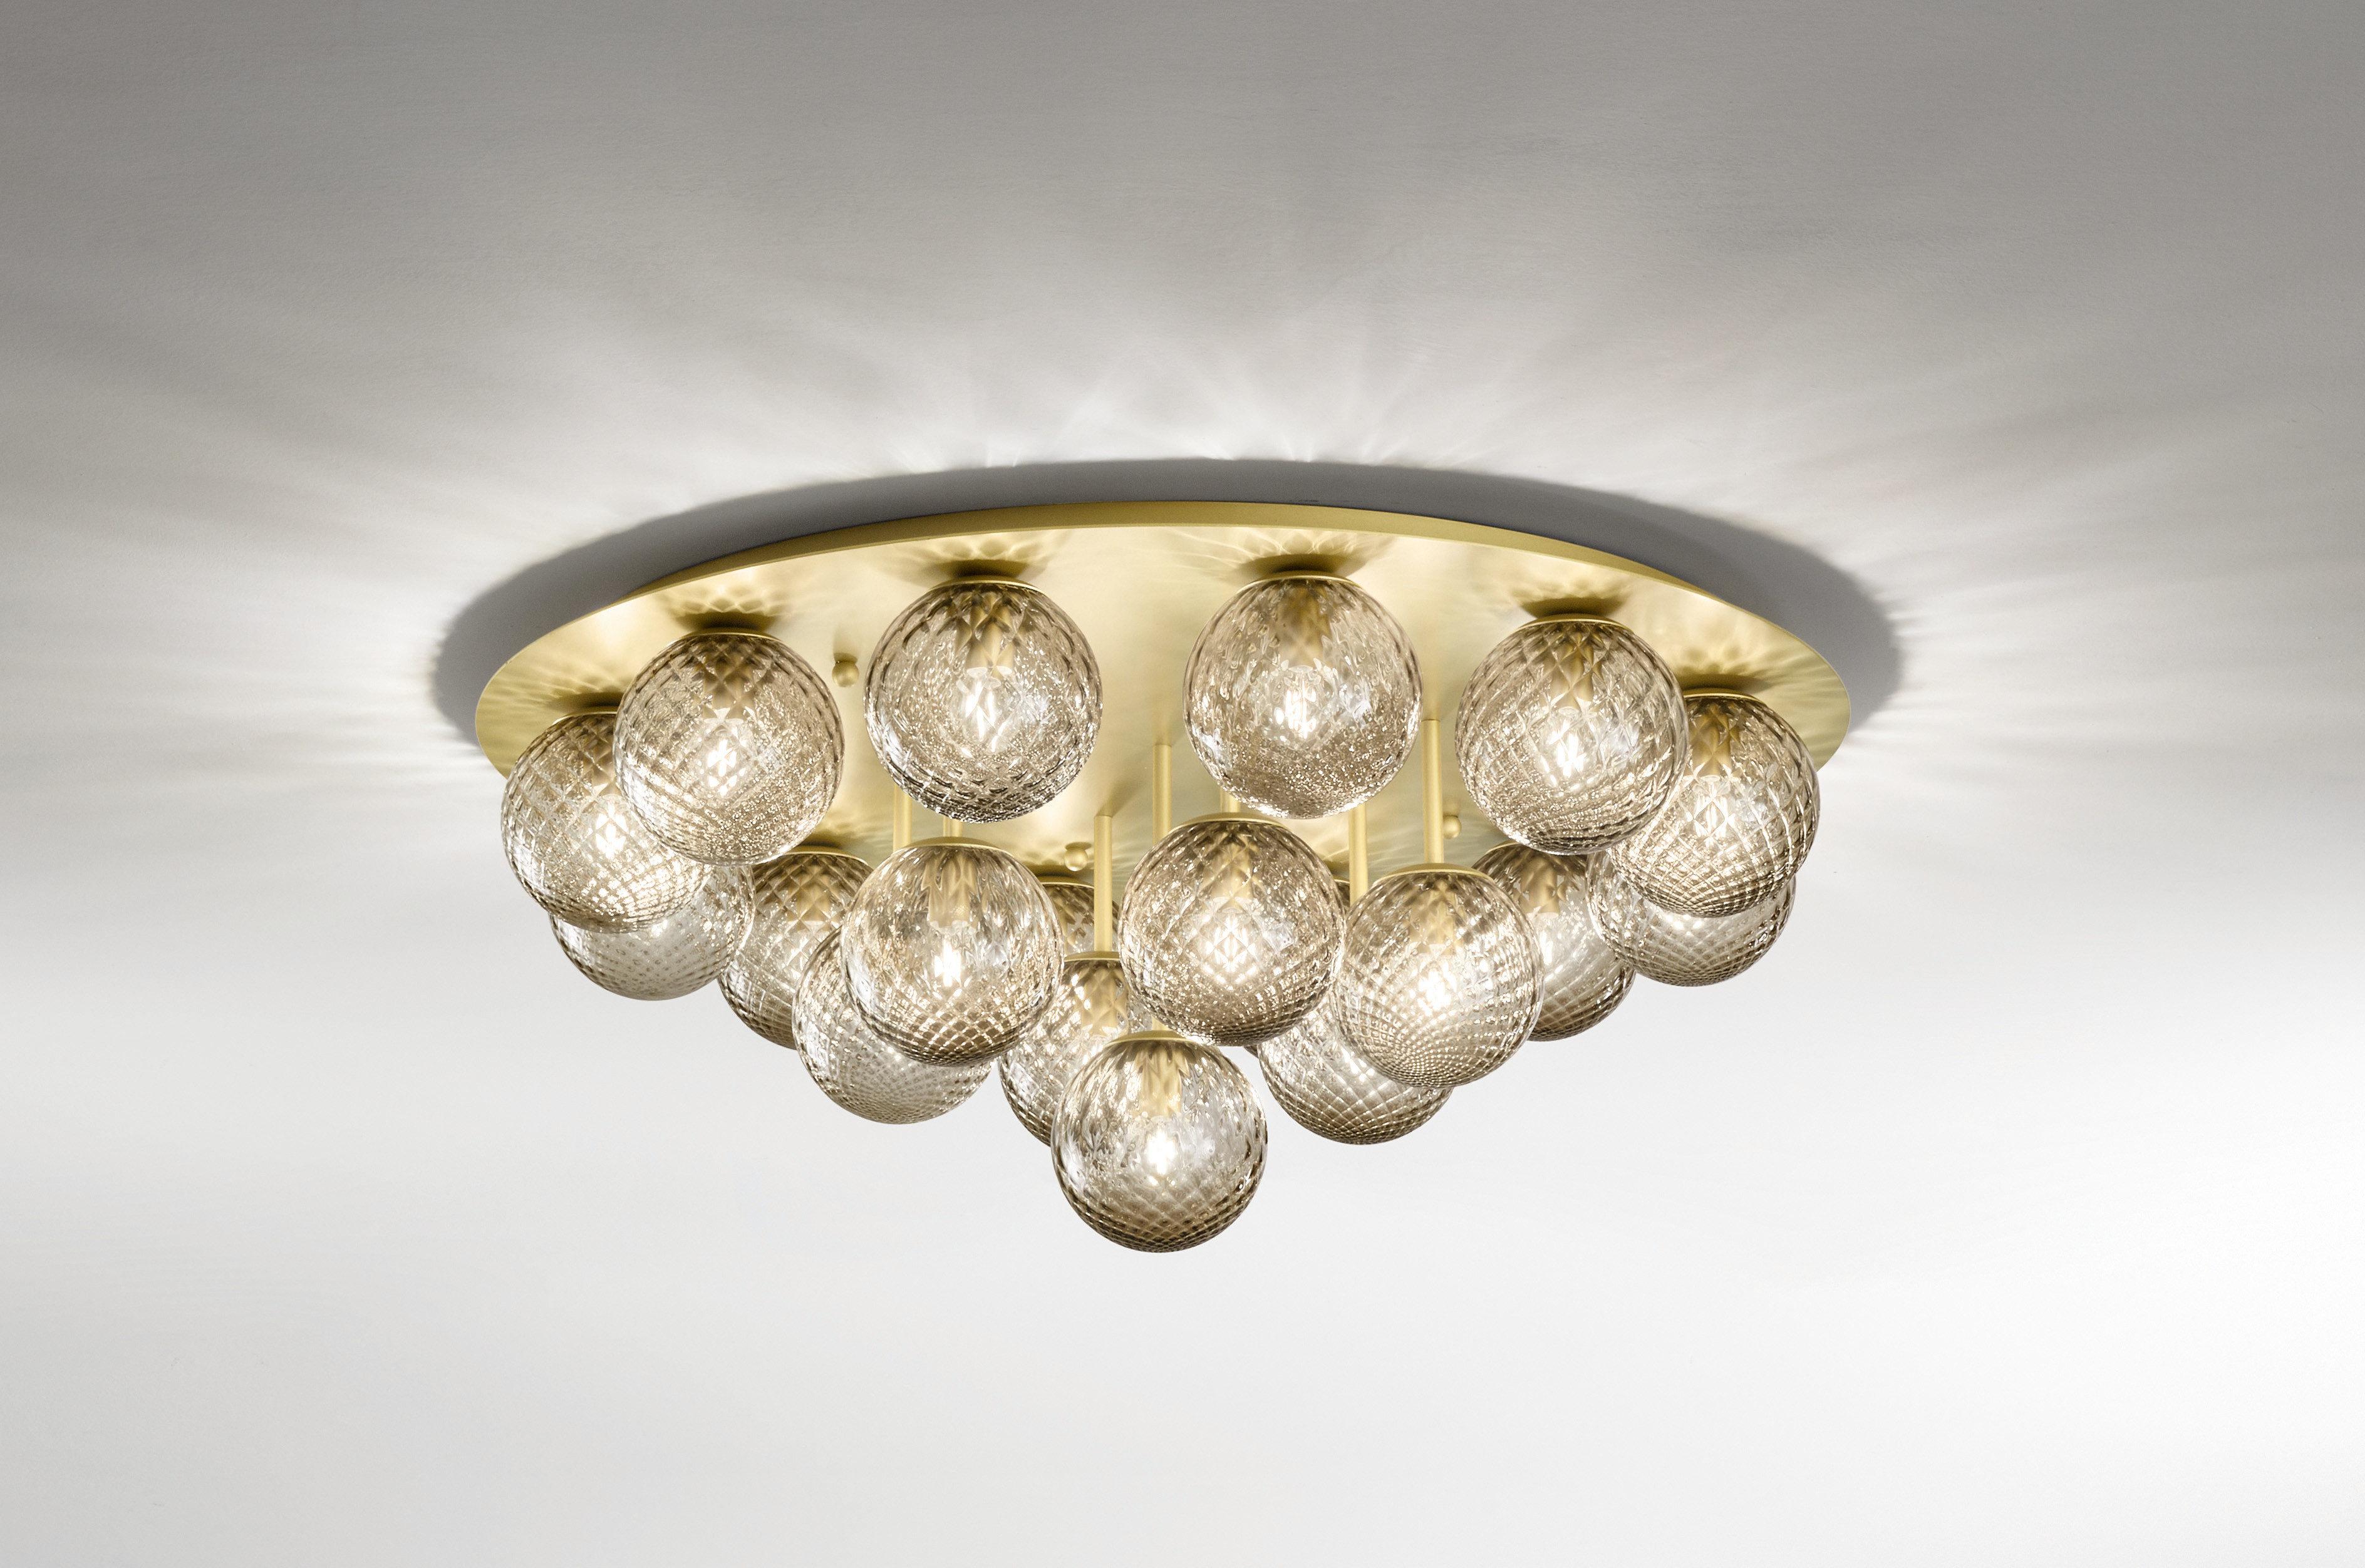 Italian modern flush mount with clear or smoky textured Murano glass globes, mounted on round ceiling plate in satin gold metal finish / Made in Italy by Fabio Ltd
19 lights / E12 or E14 type / max 40W each
Measures: diameter 37 inches, height 16